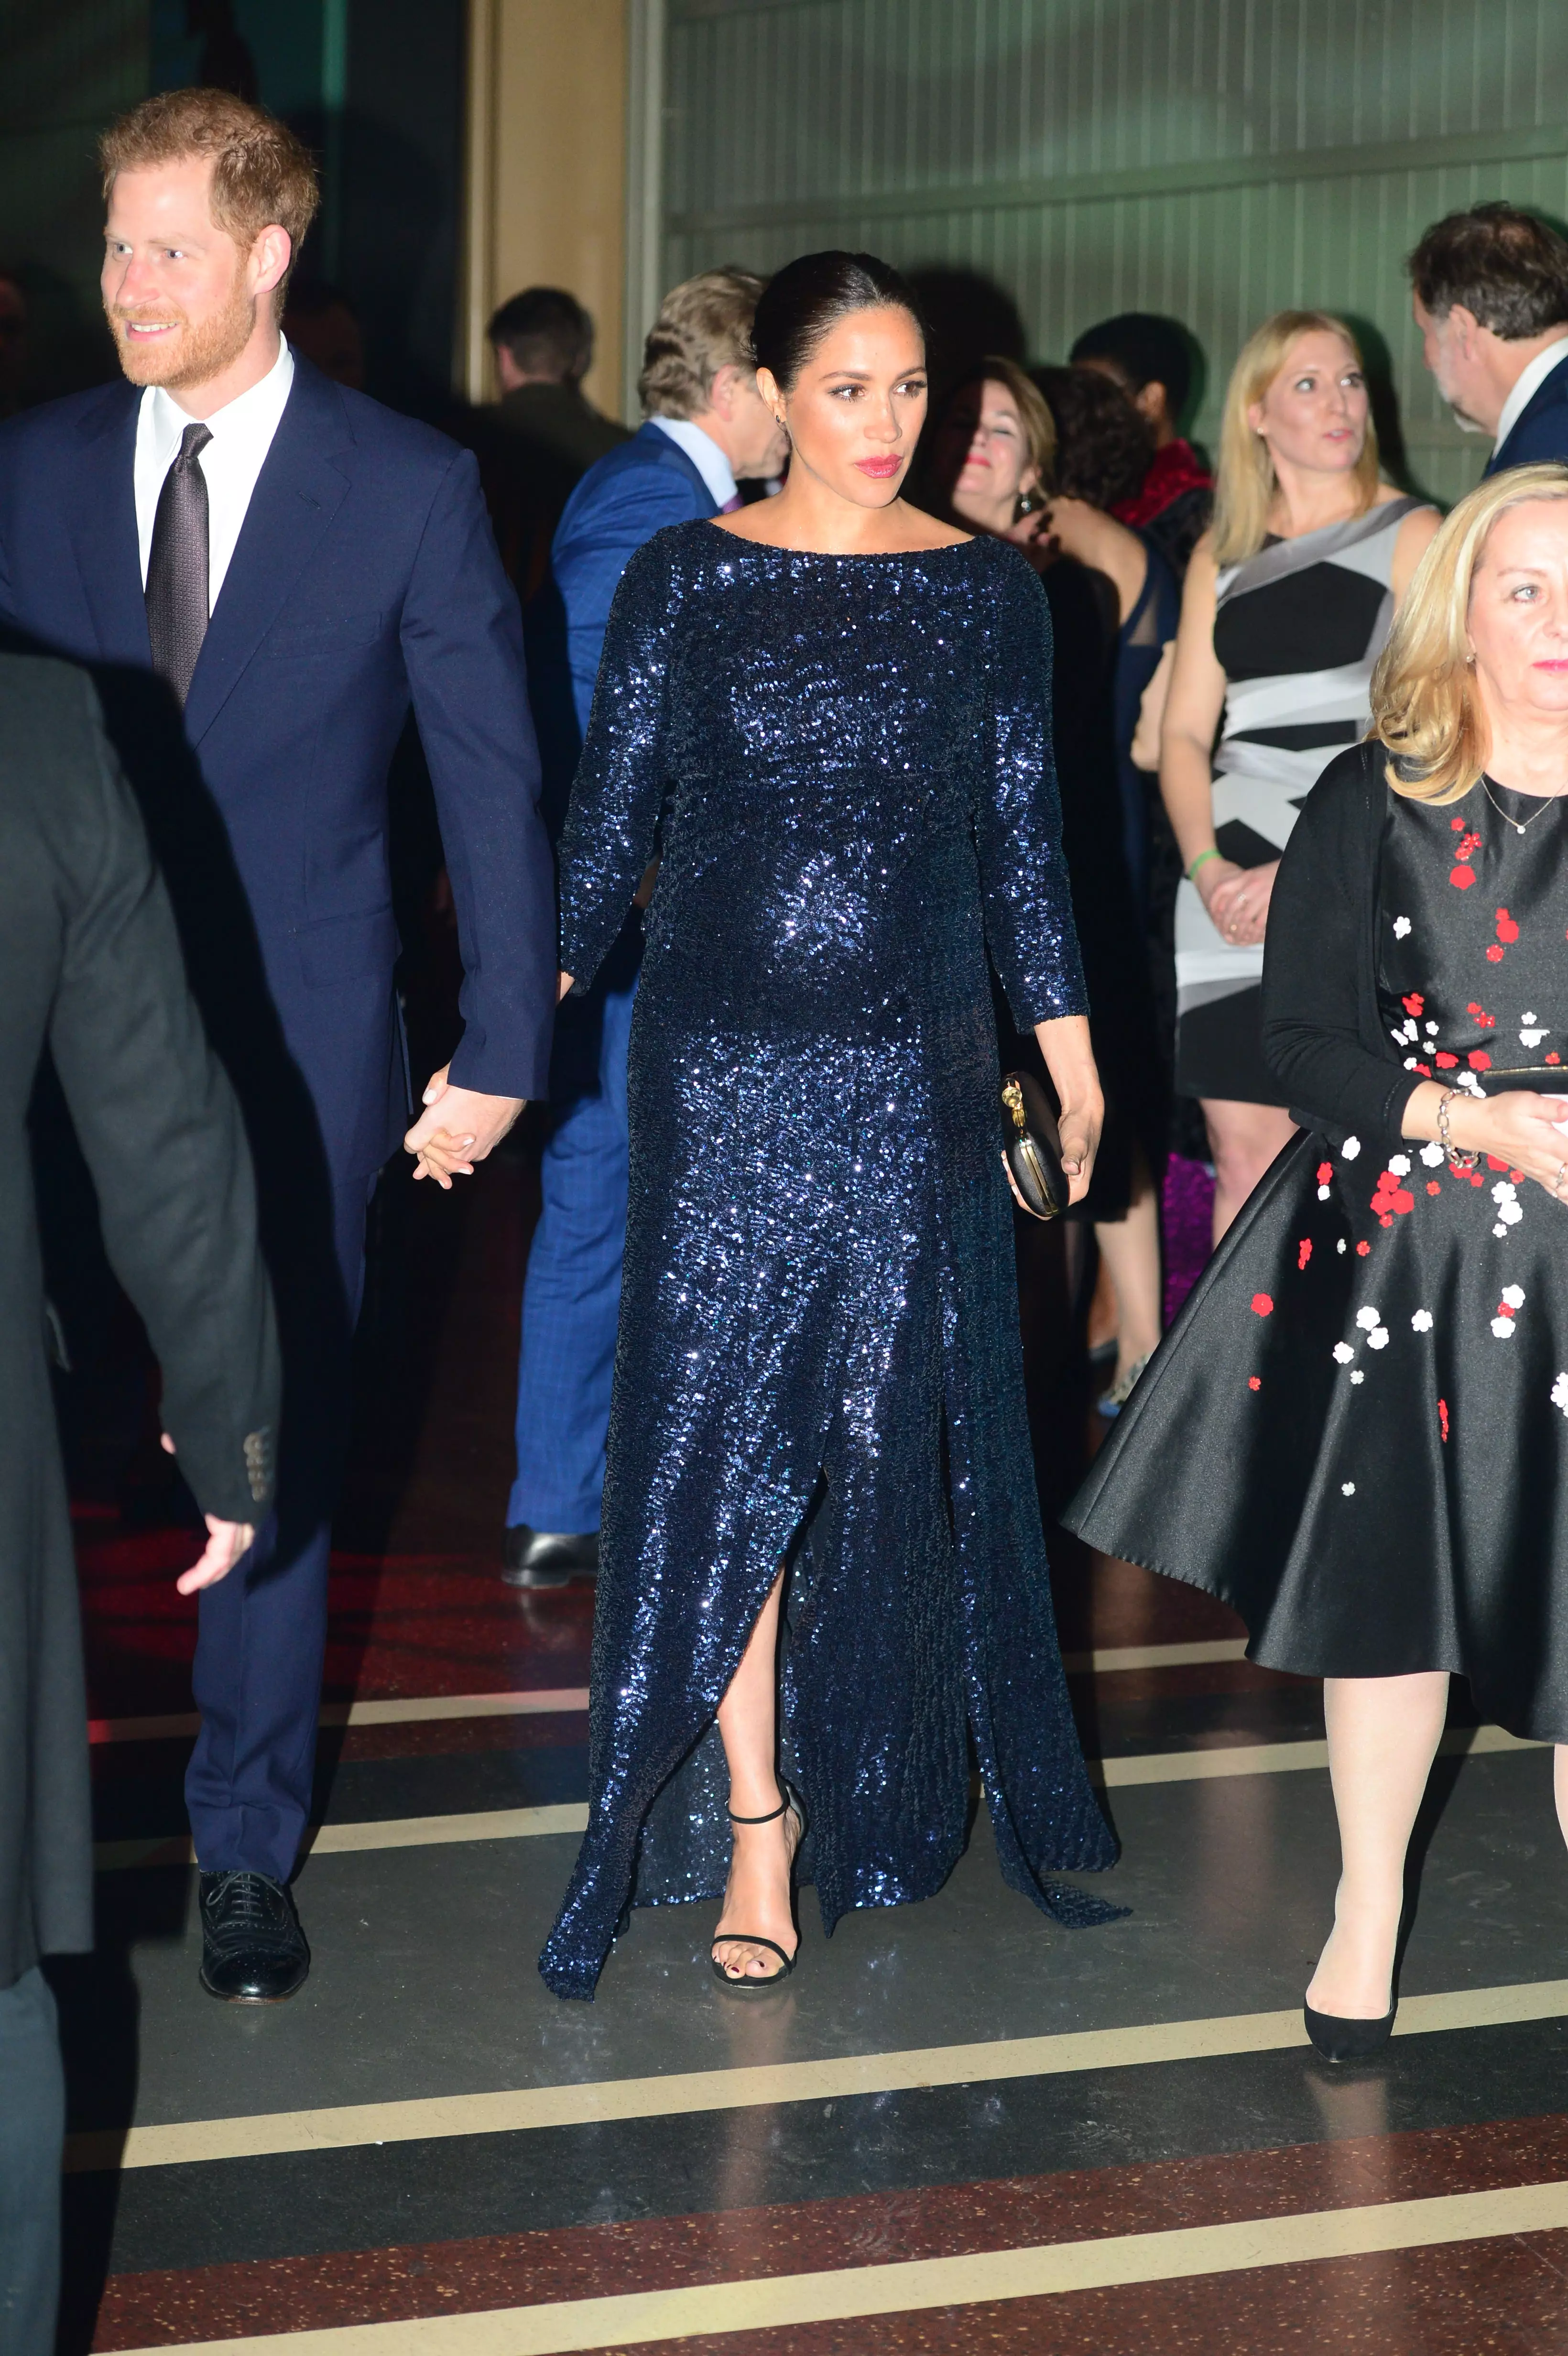 The couple attended an event at the Royal Albert Hall in January 2019 (